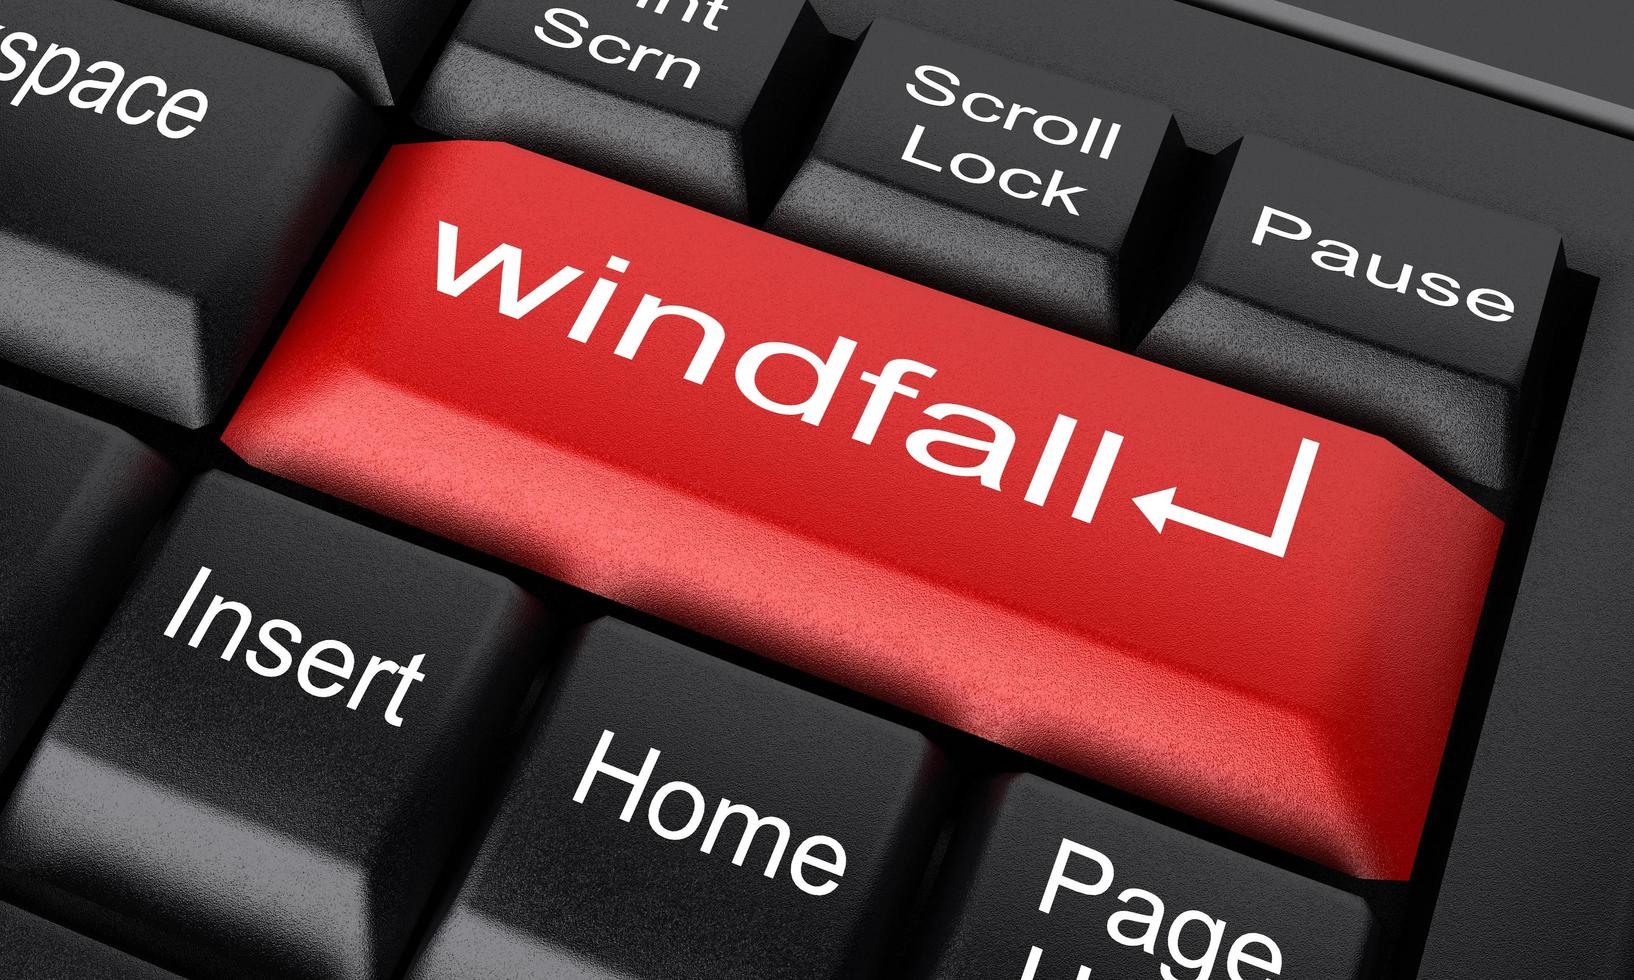 windfall word on red keyboard button photo